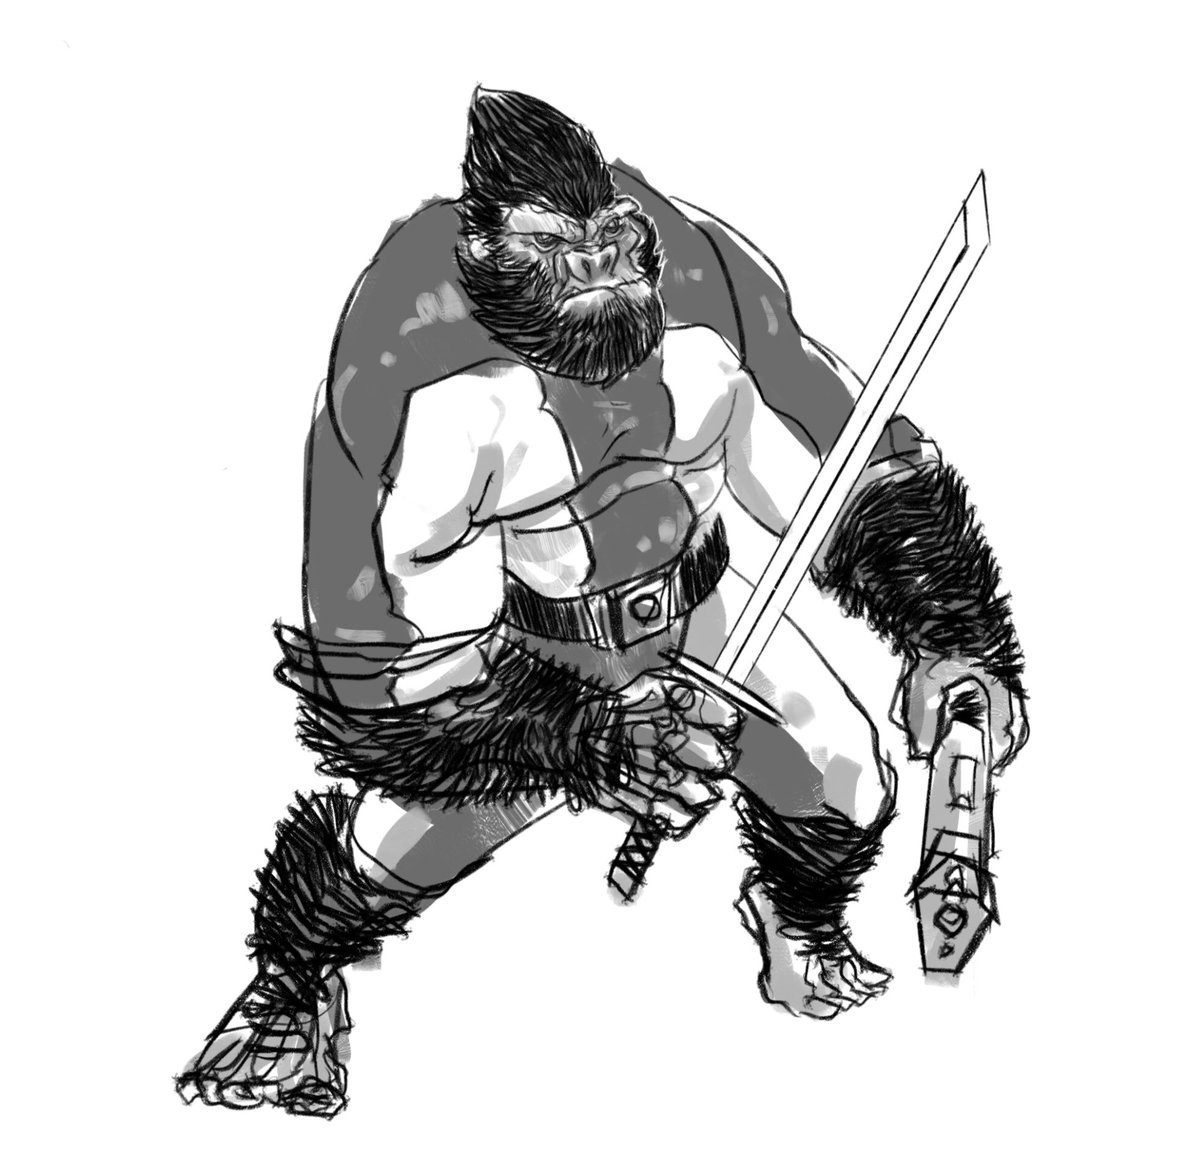  @EdGreerDestroys badass Max Simian, because who the fuck doesn’t like to draw badass gorillas?